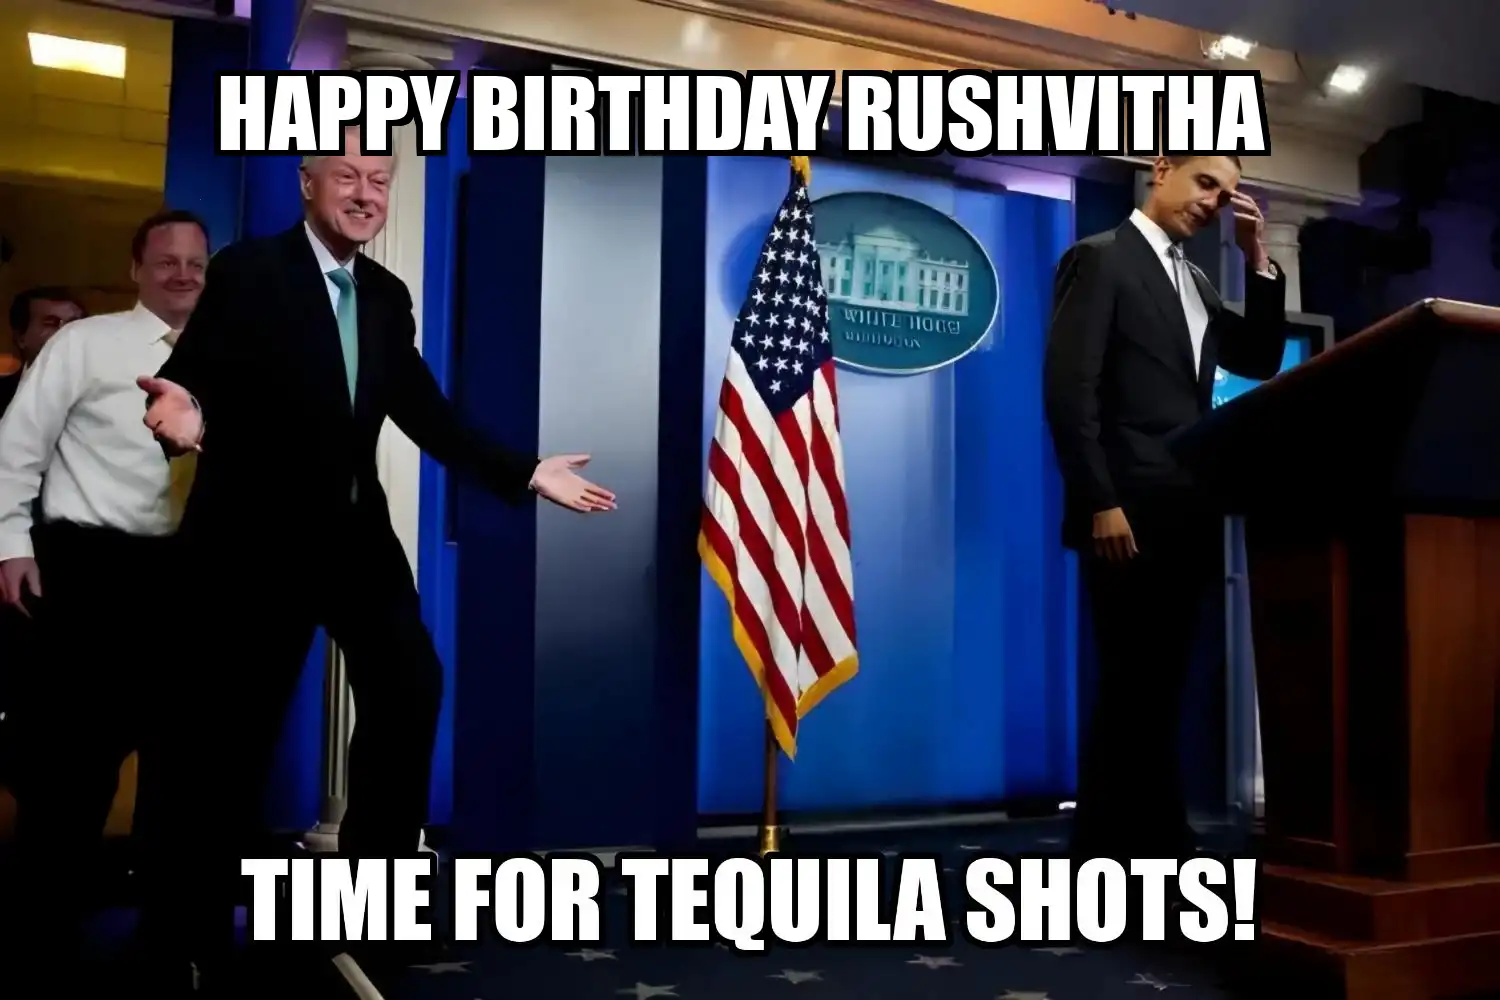 Happy Birthday Rushvitha Time For Tequila Shots Memes